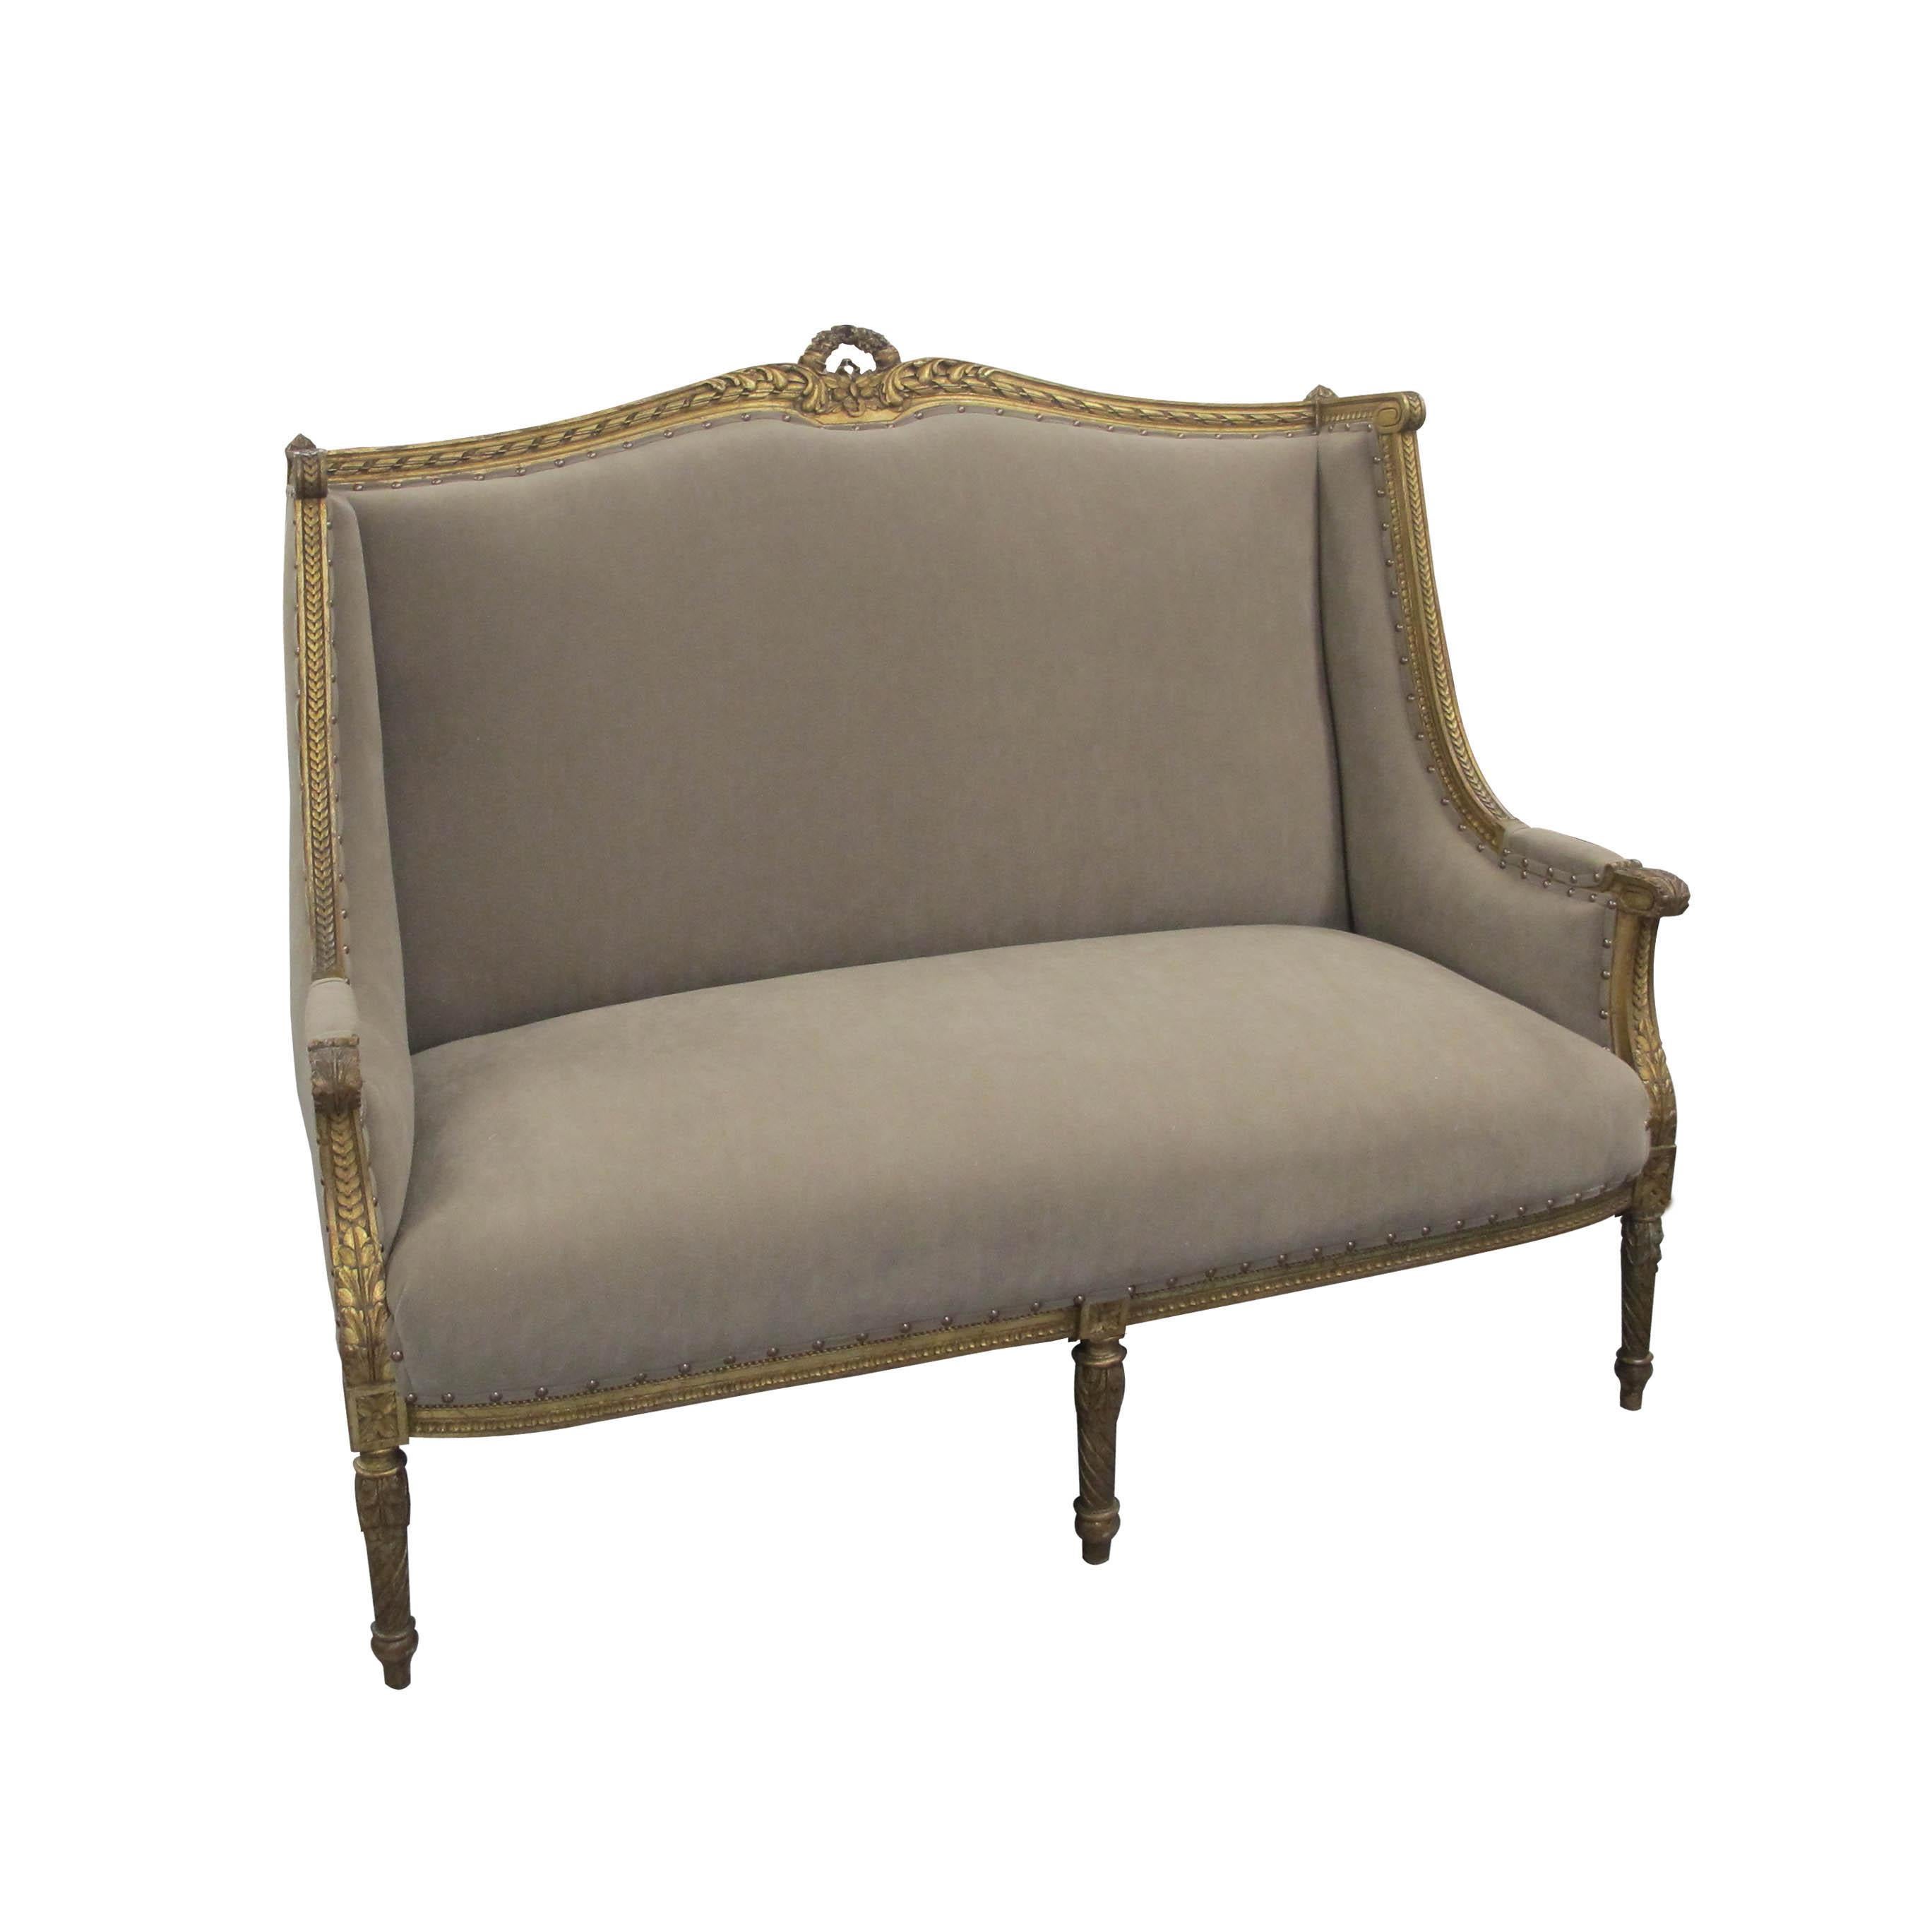 Louis the XVI style, high-backed two-seat French marquise sofa, circa 1880. Recently reupholstered in a Suede like Impala fabric, in a light brown color, which is easy to clean and very resistant. Feature antiqued studs secure the fabric in place to